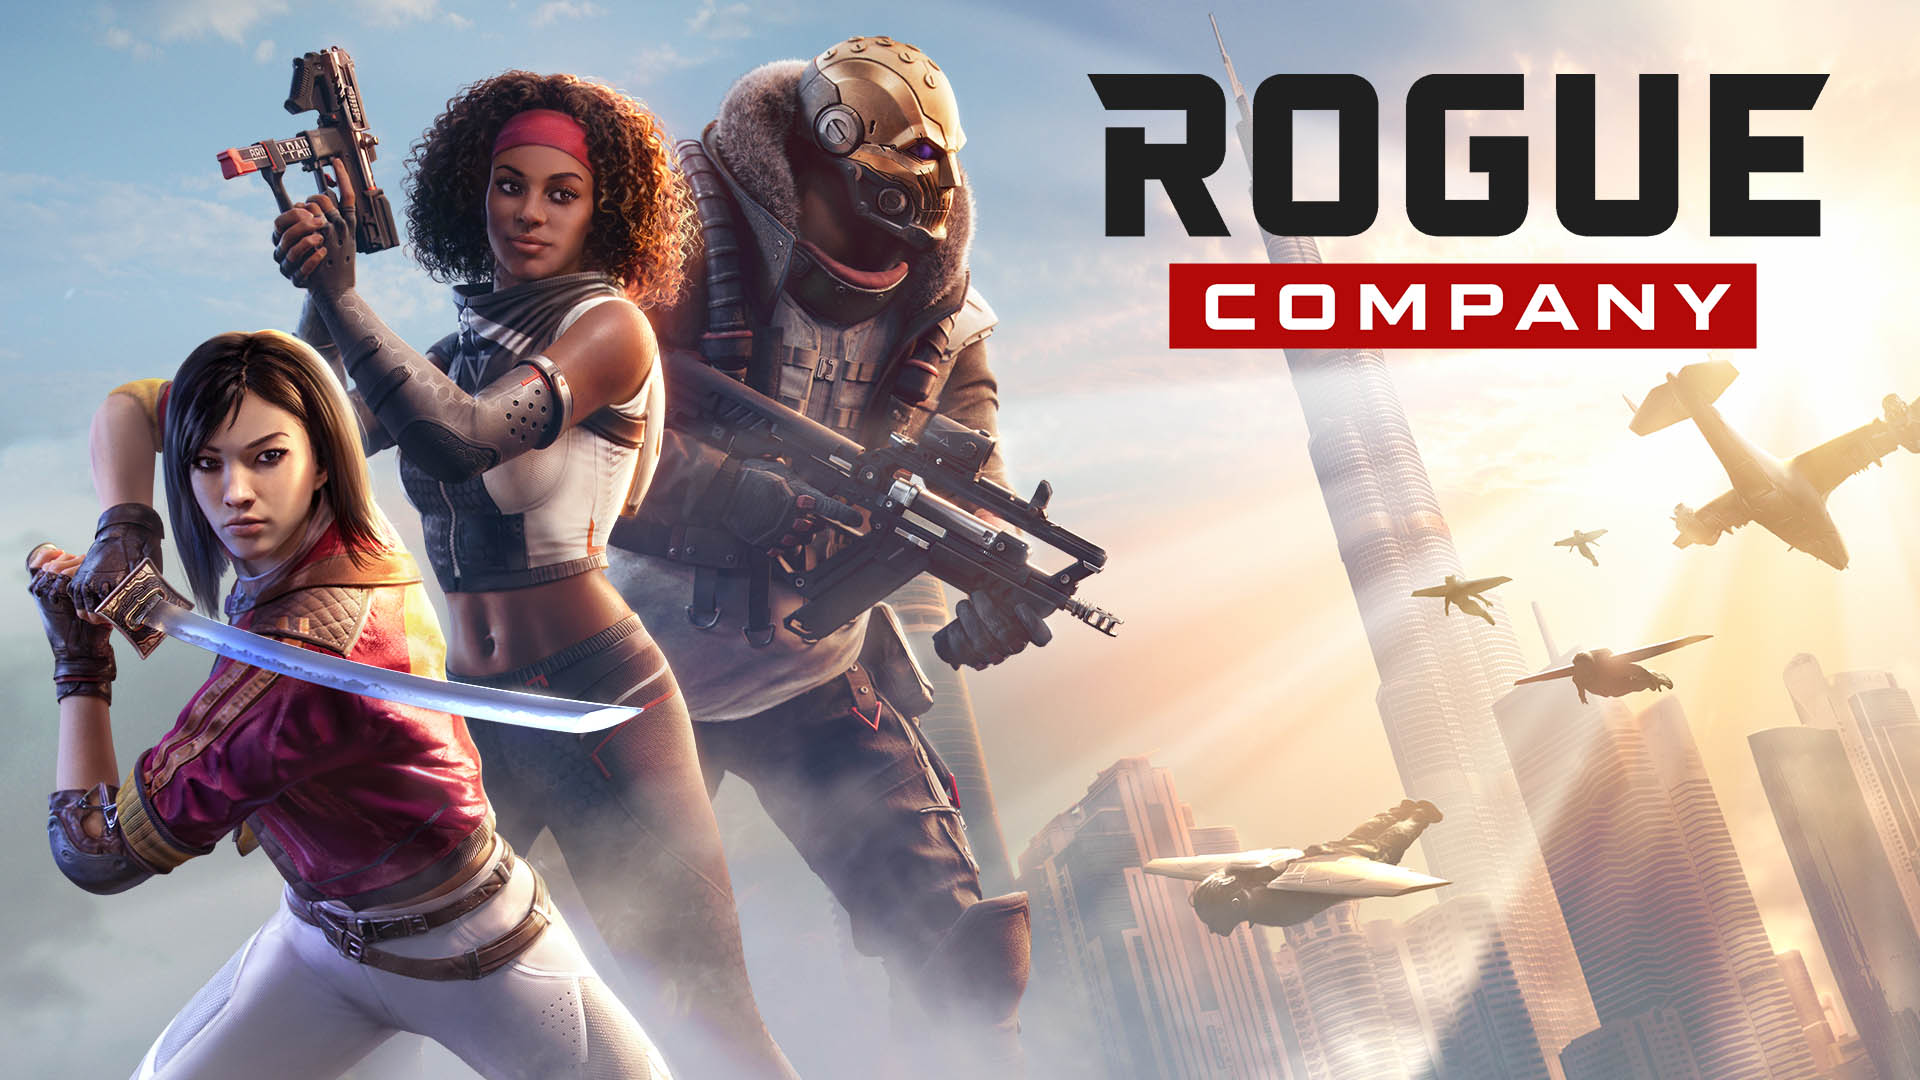 Rogue Company new character Umbra revealed in trailer